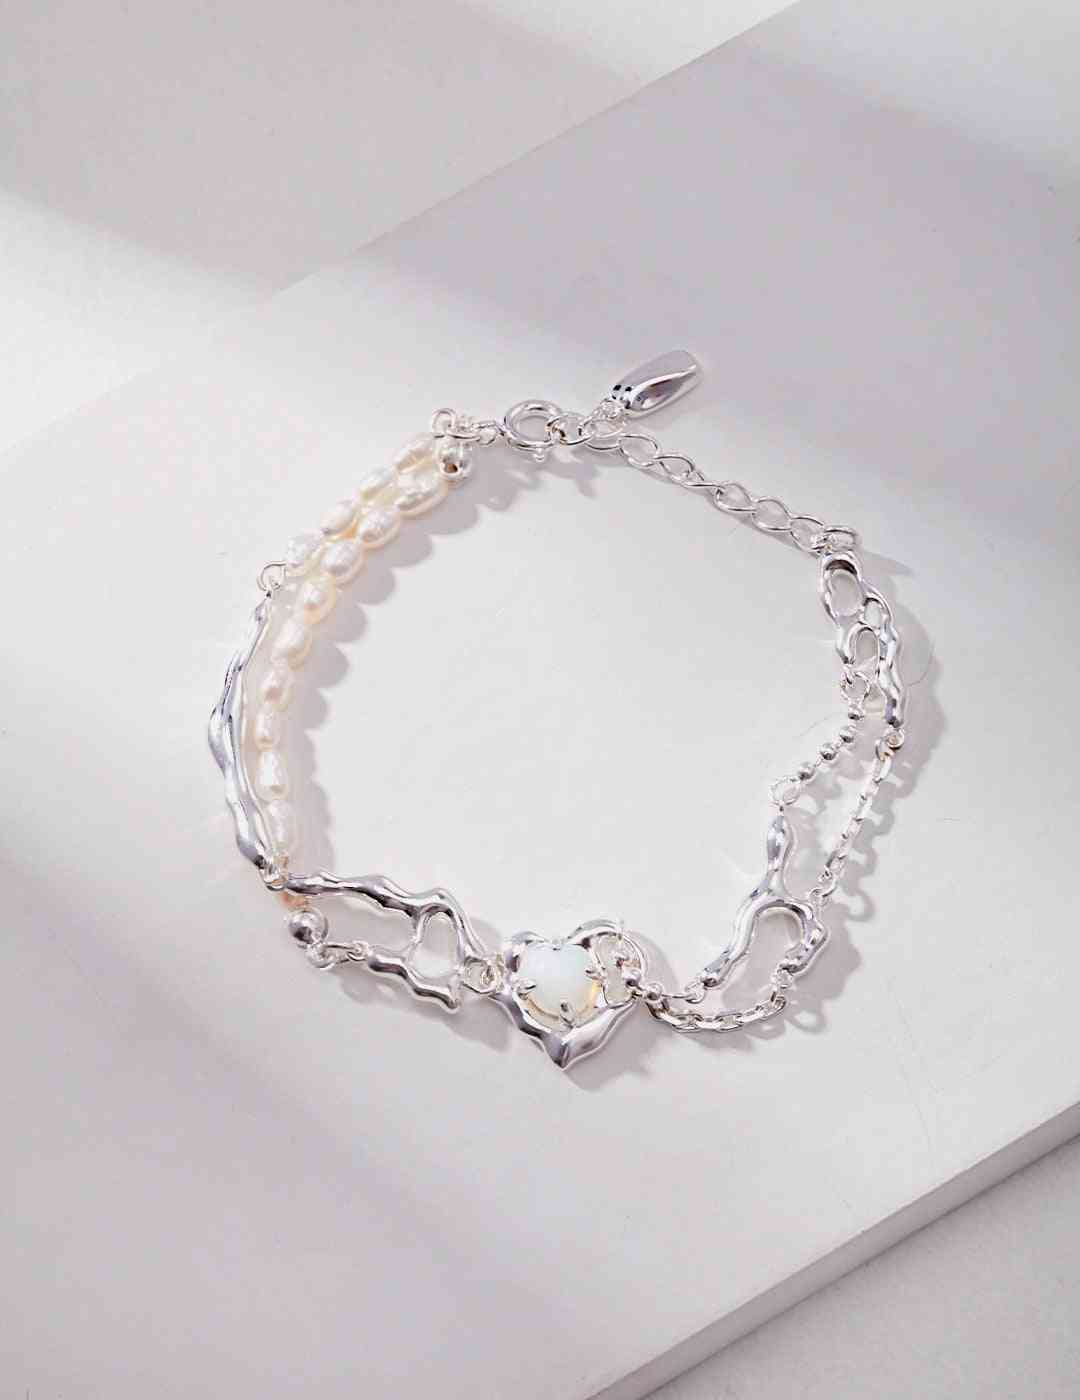 a silver bracelet with pearls and a heart charm